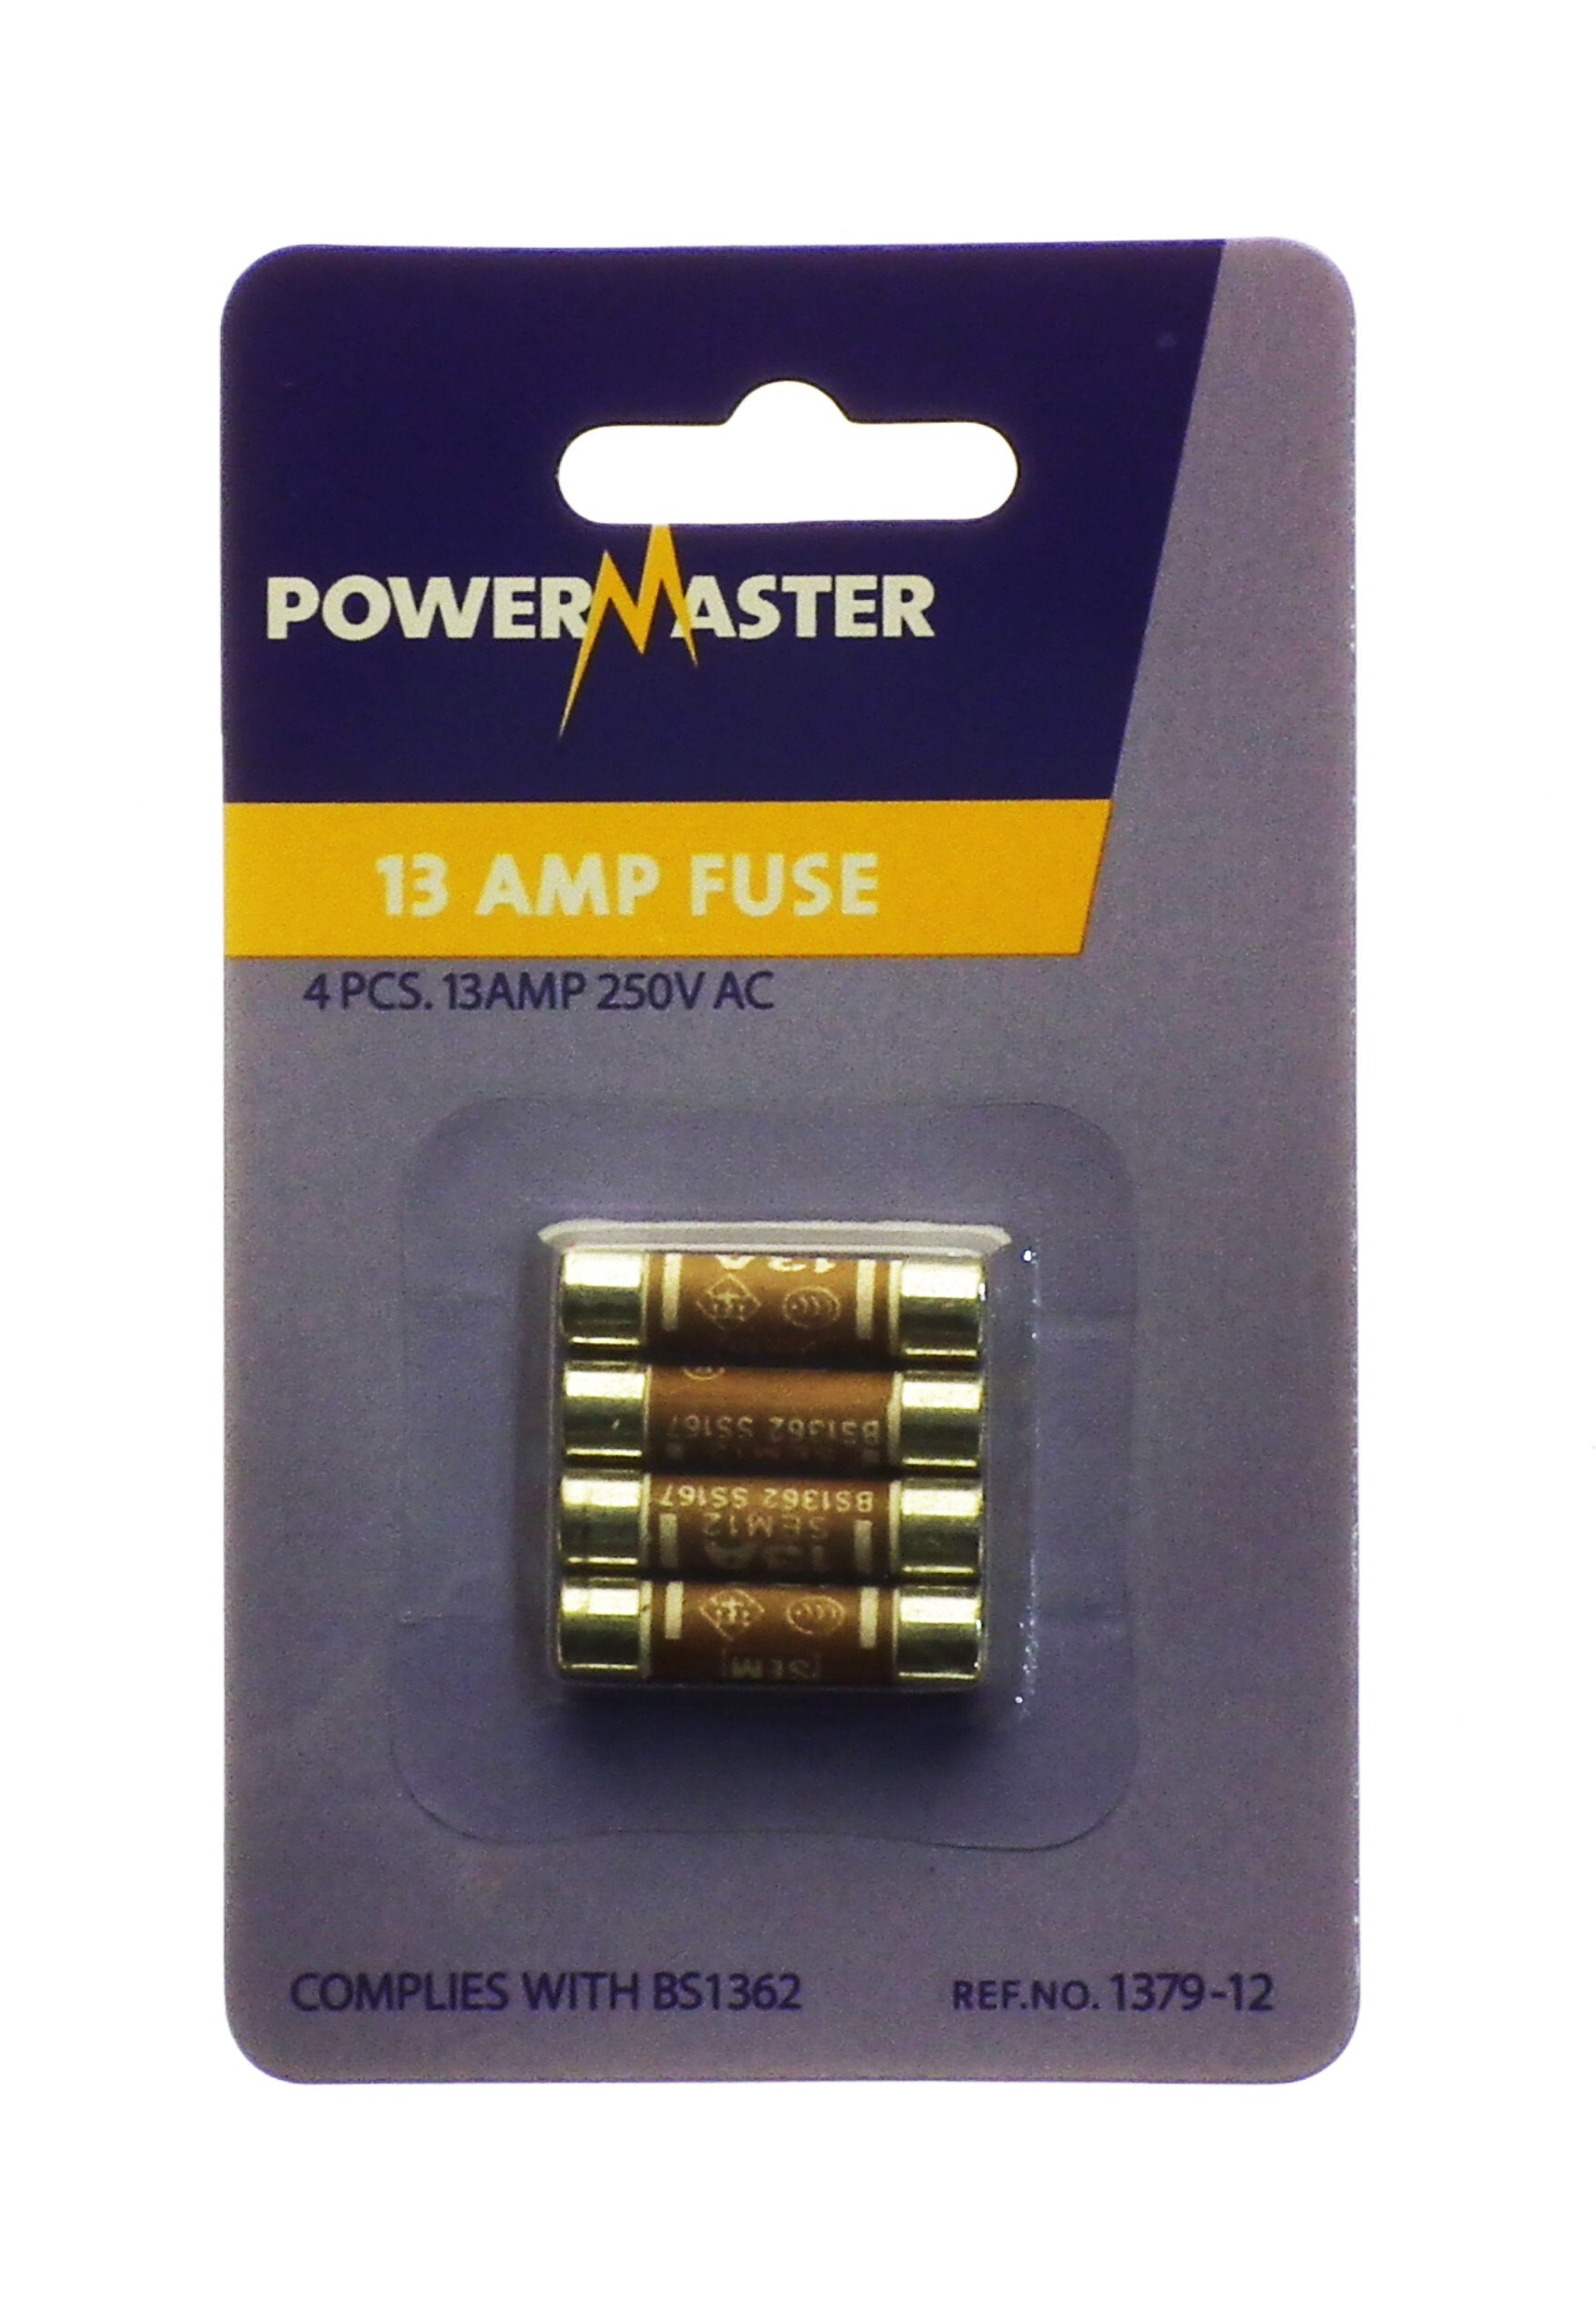 Fuses & Plugs| Powermaster Fuse Card - 13 Amp by Weirs of Baggot St